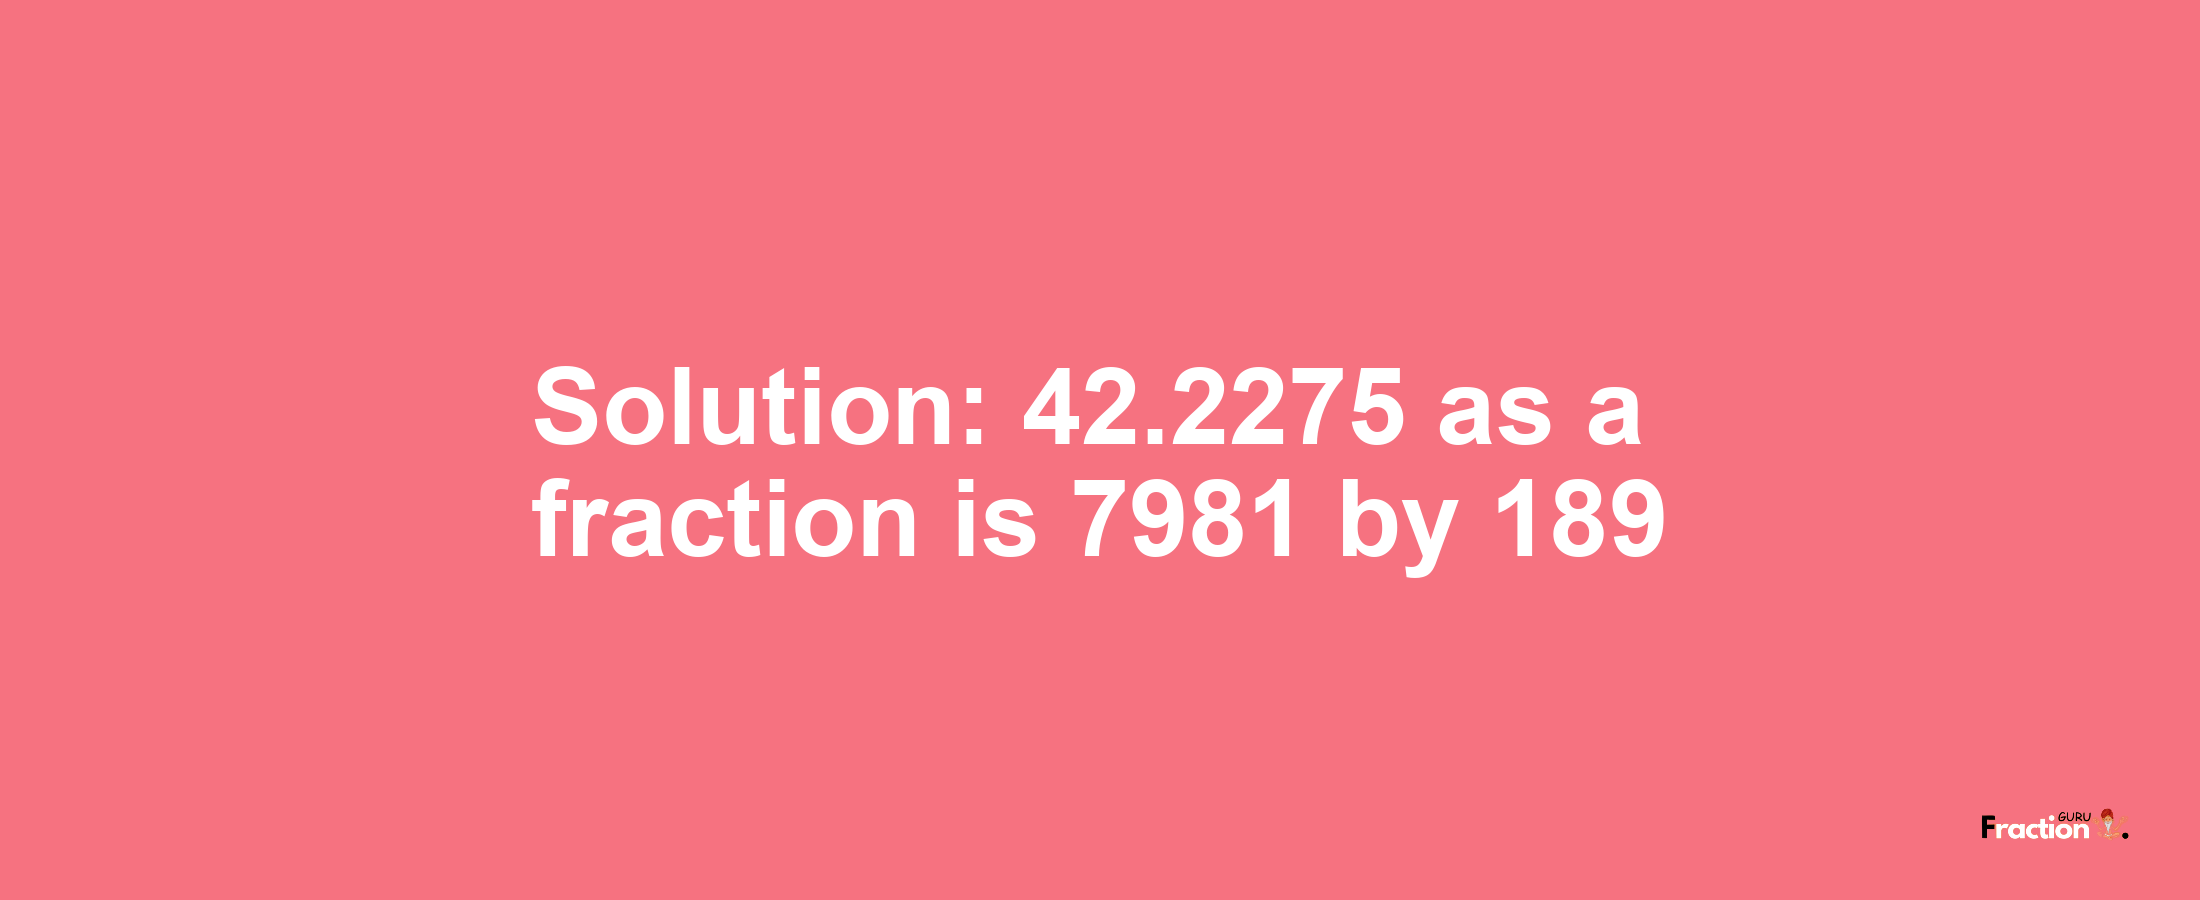 Solution:42.2275 as a fraction is 7981/189